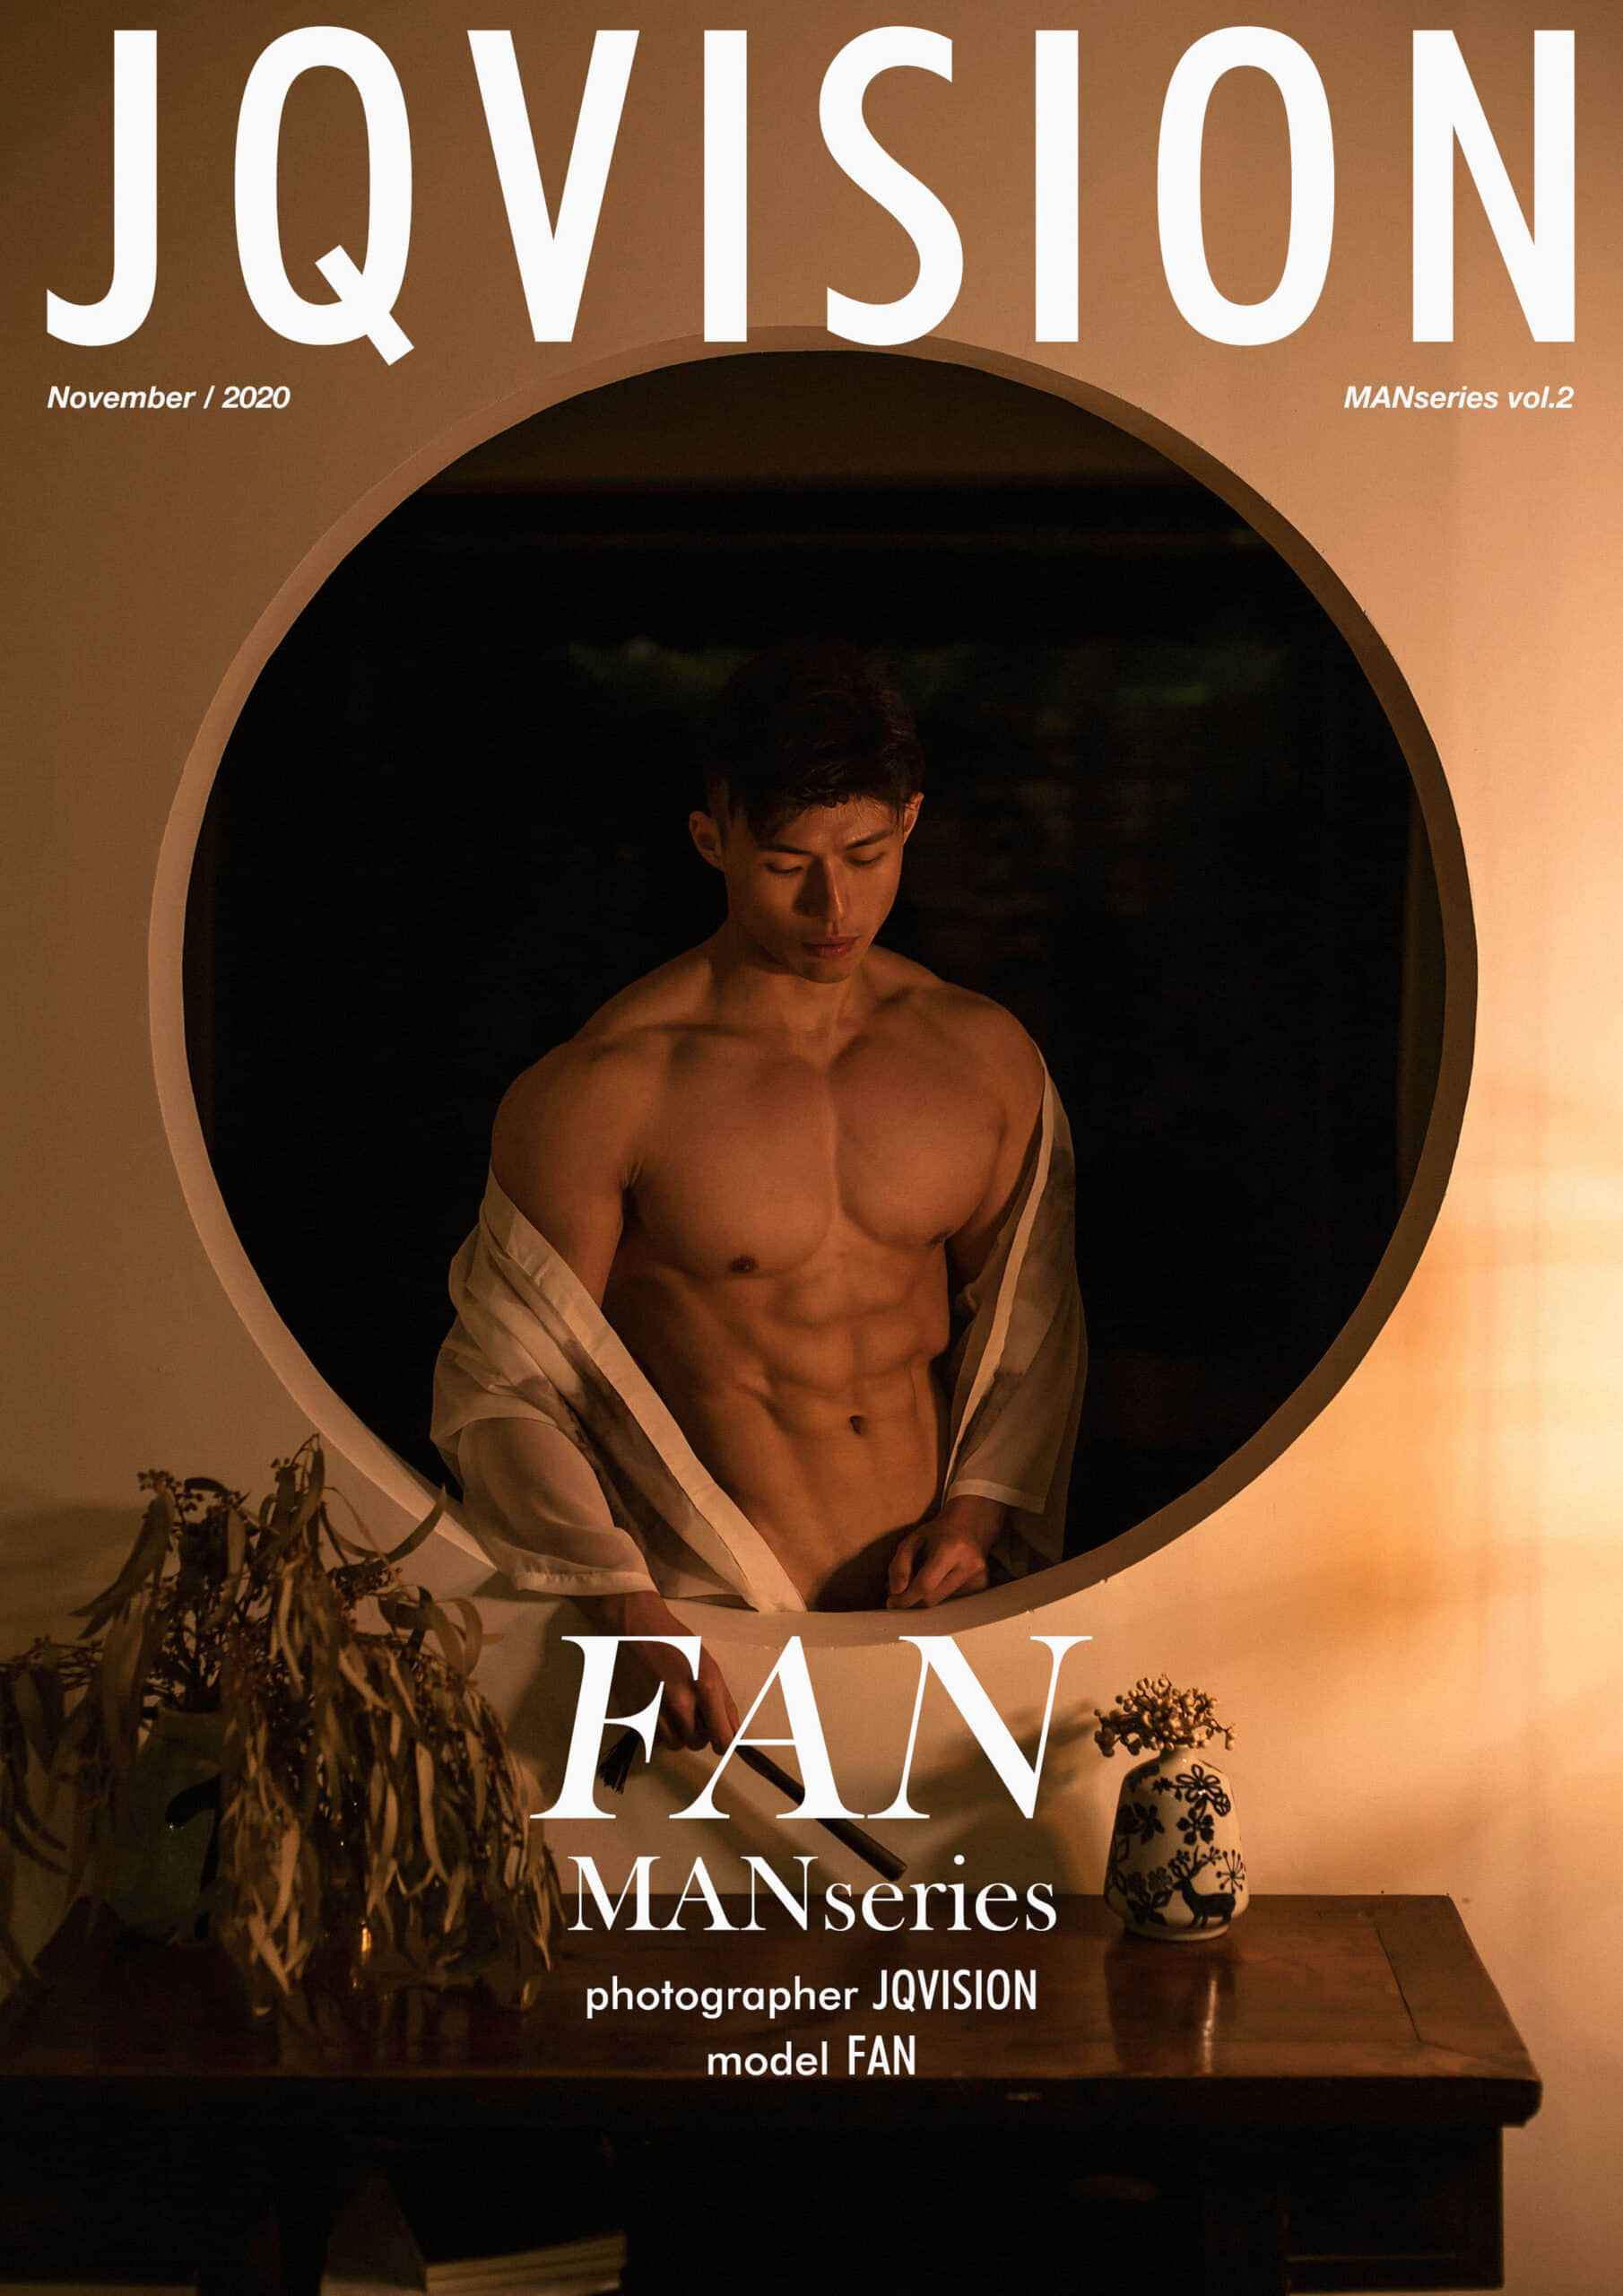 JQVISION MANseries No.2 – FAN-NICEGAY